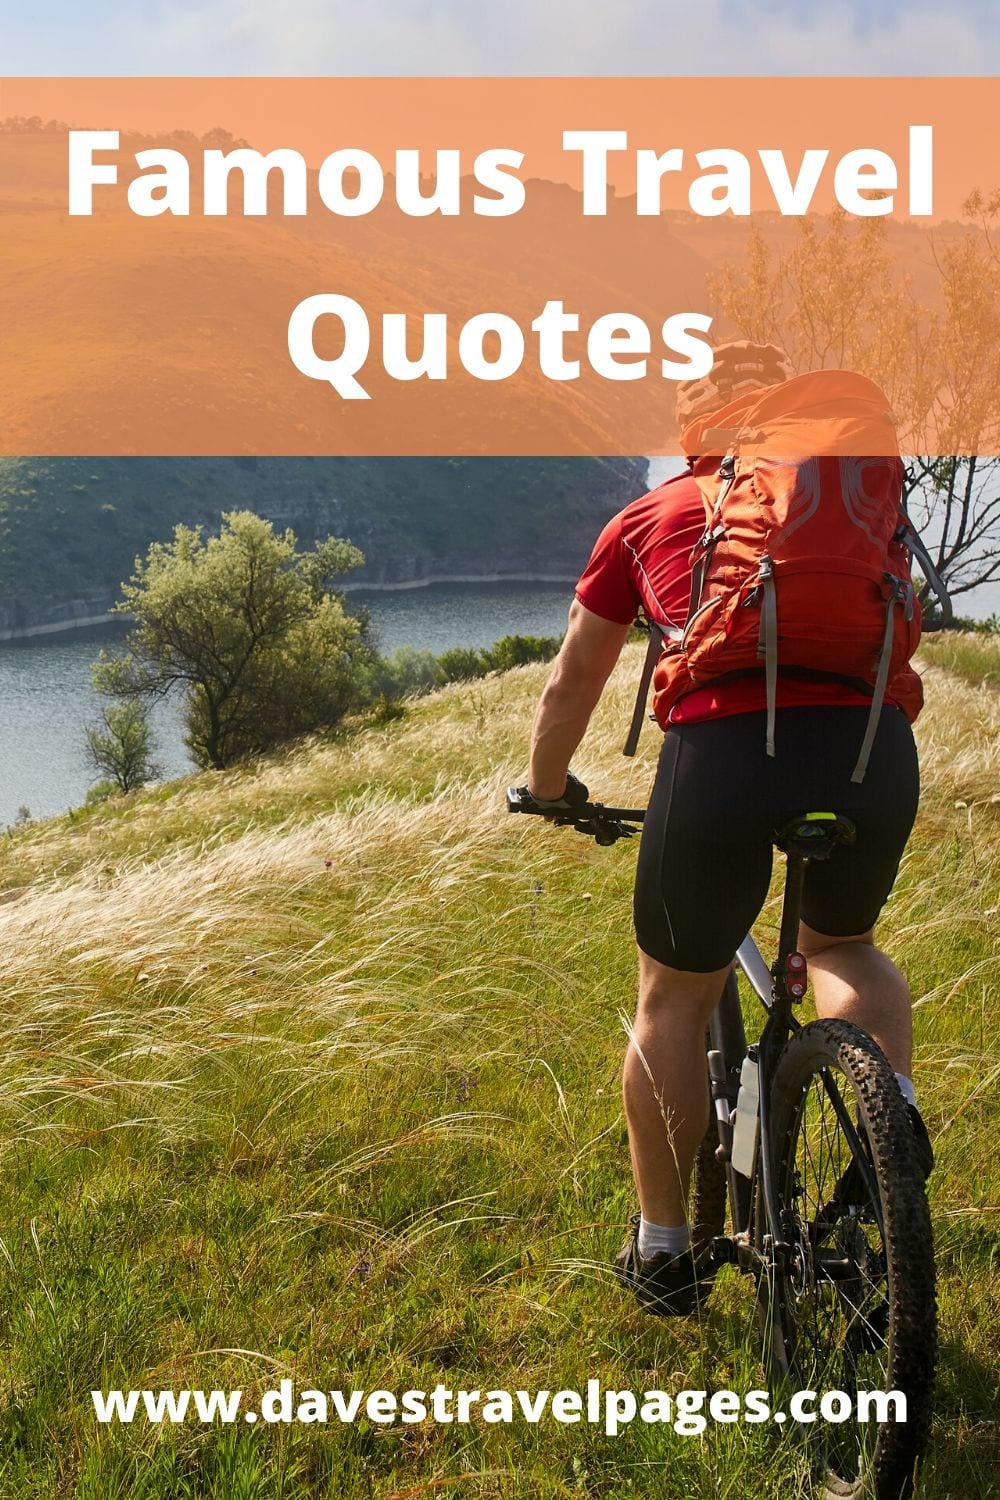 Famous travel quotes by adventurers, explorers, travelers and philosophers